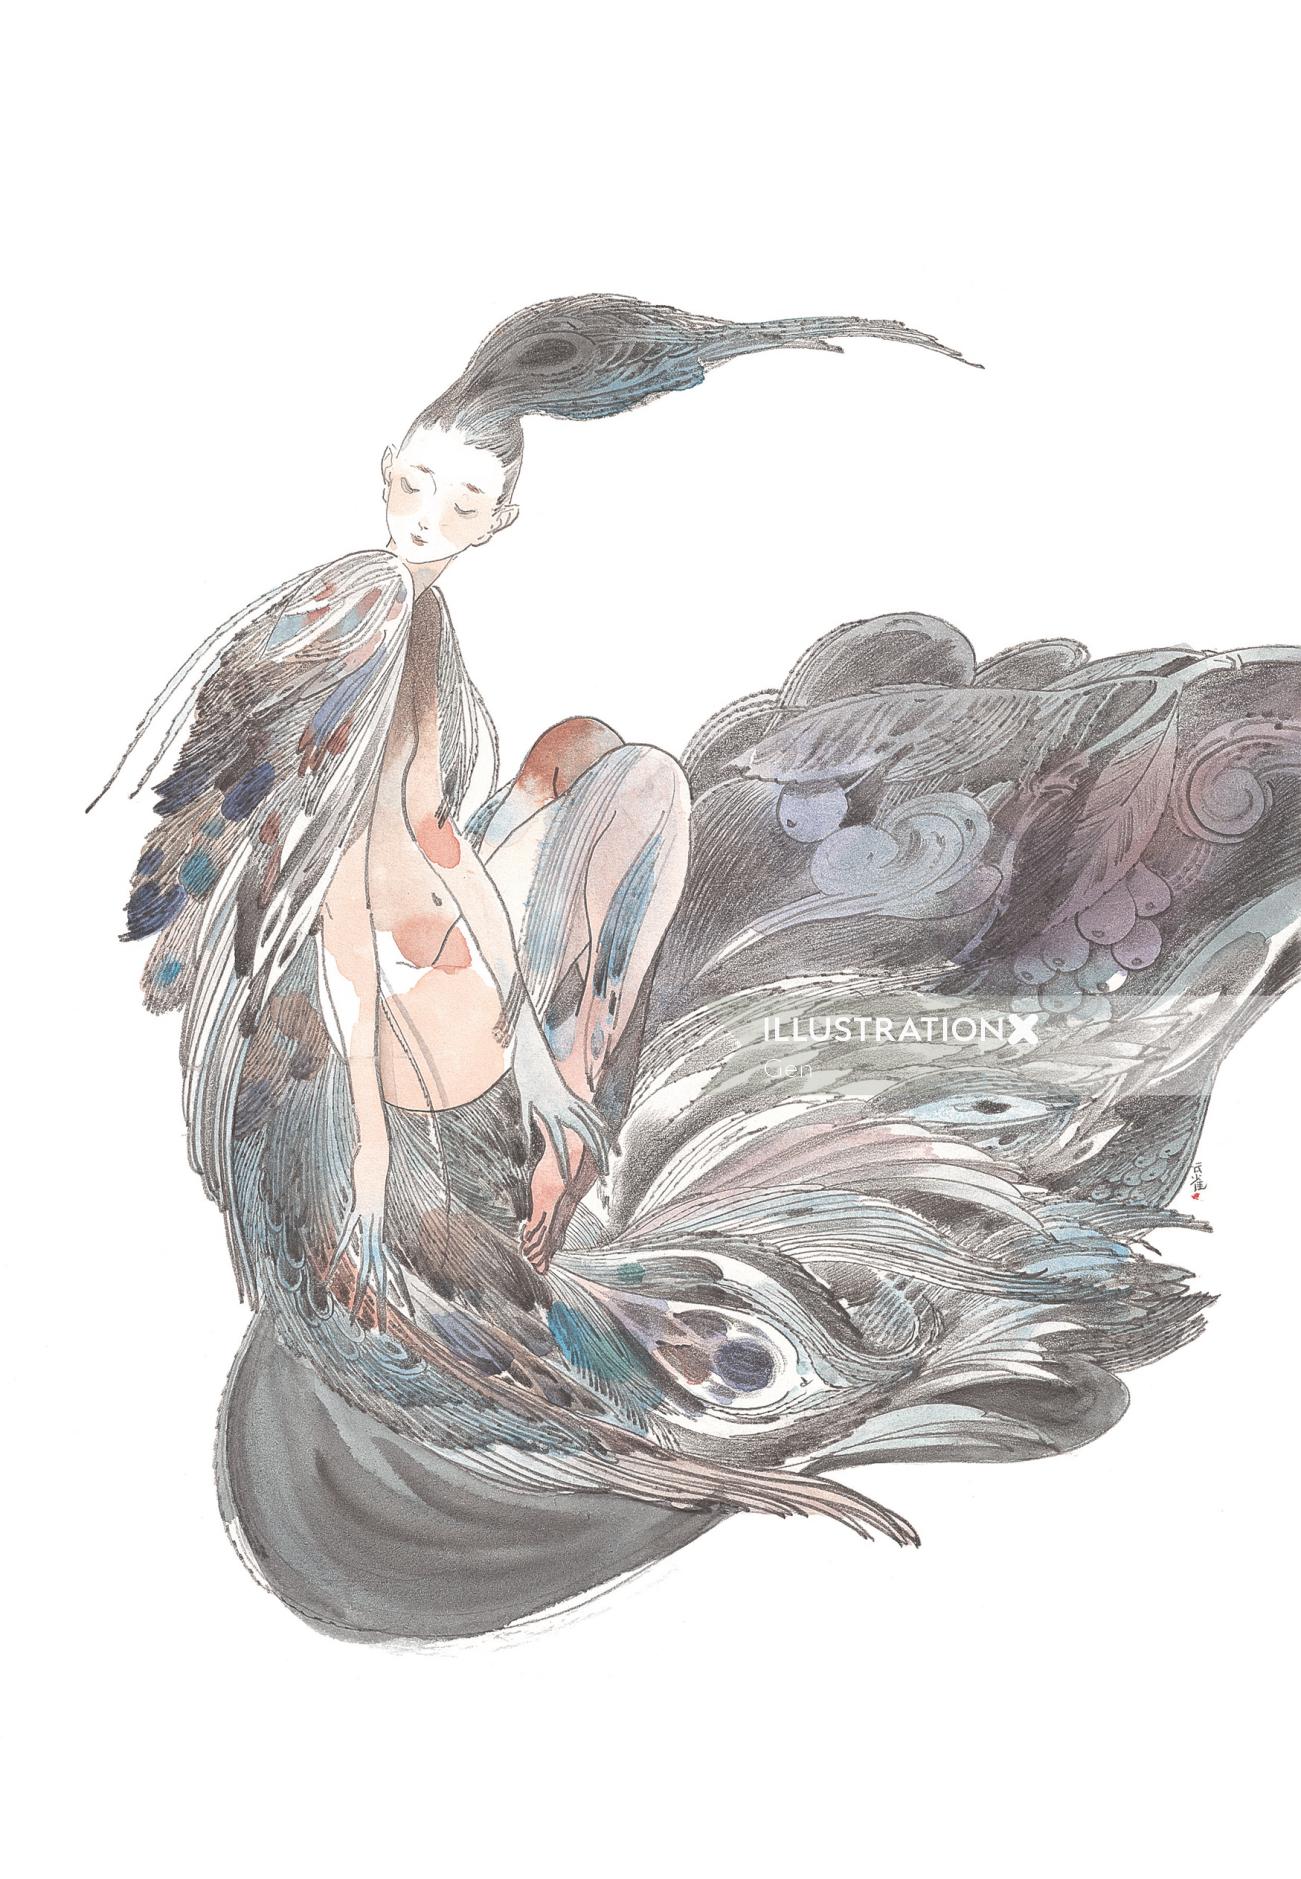 Contemporary illustration woman peacock feathers
